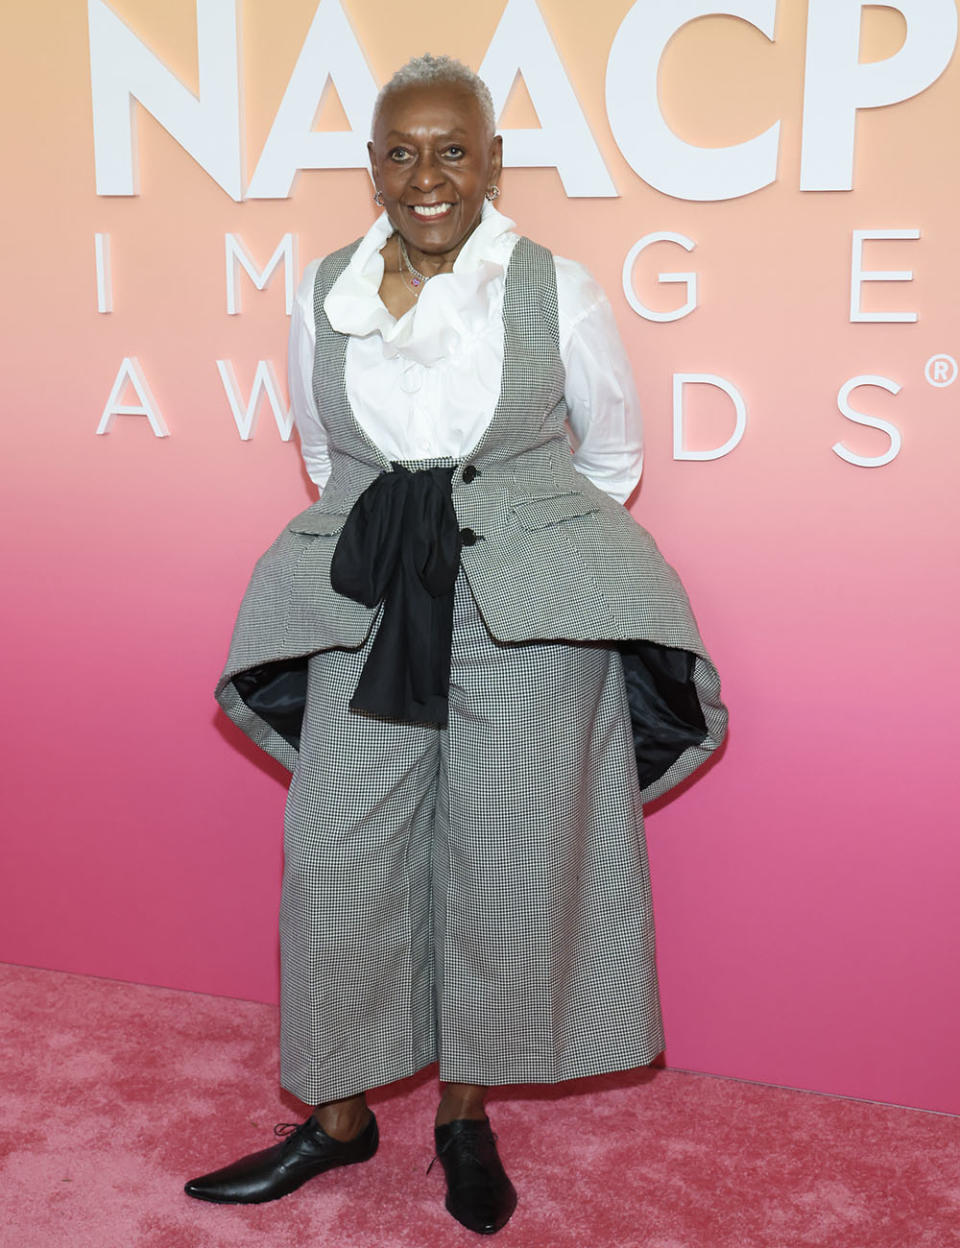 Bethann Hardison arrives at the 54th NAACP Image Awards nominees reception and fashion show at L.A. Live Event Deck on February 23, 2023 in Los Angeles, California.